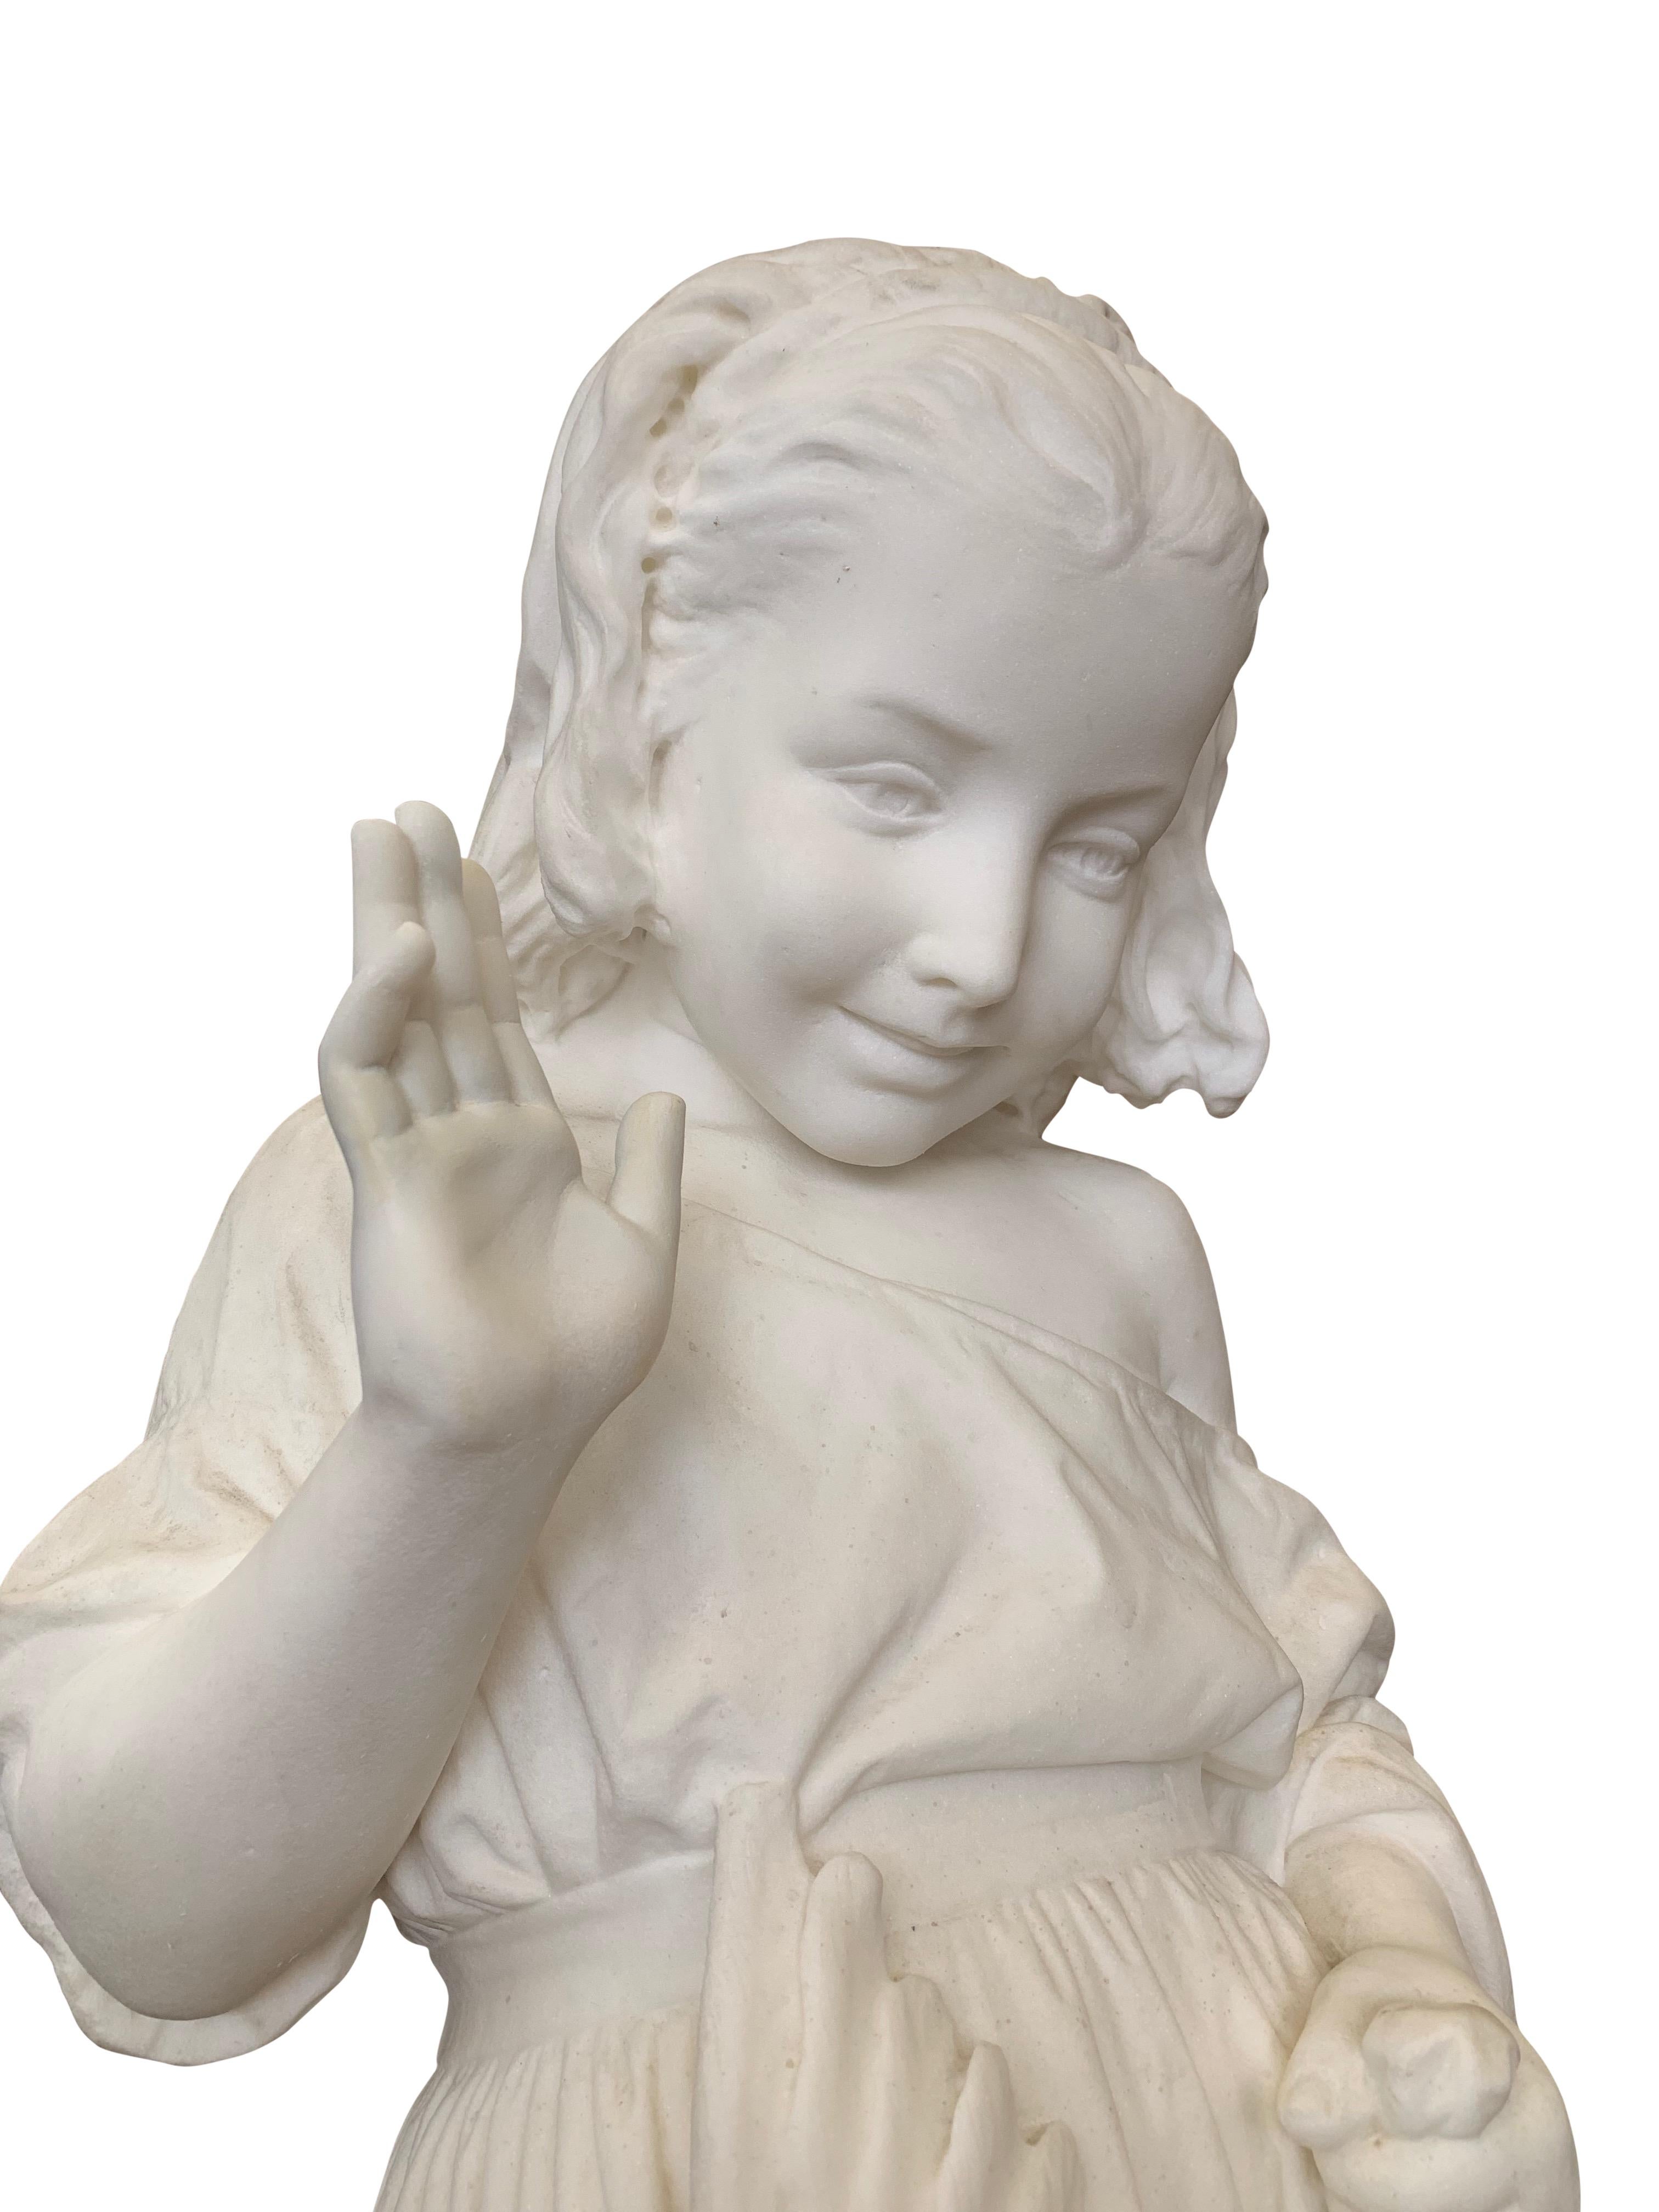 19th Century Italian Carved Marble Figure of a Young Girl by Caroni For Sale 4